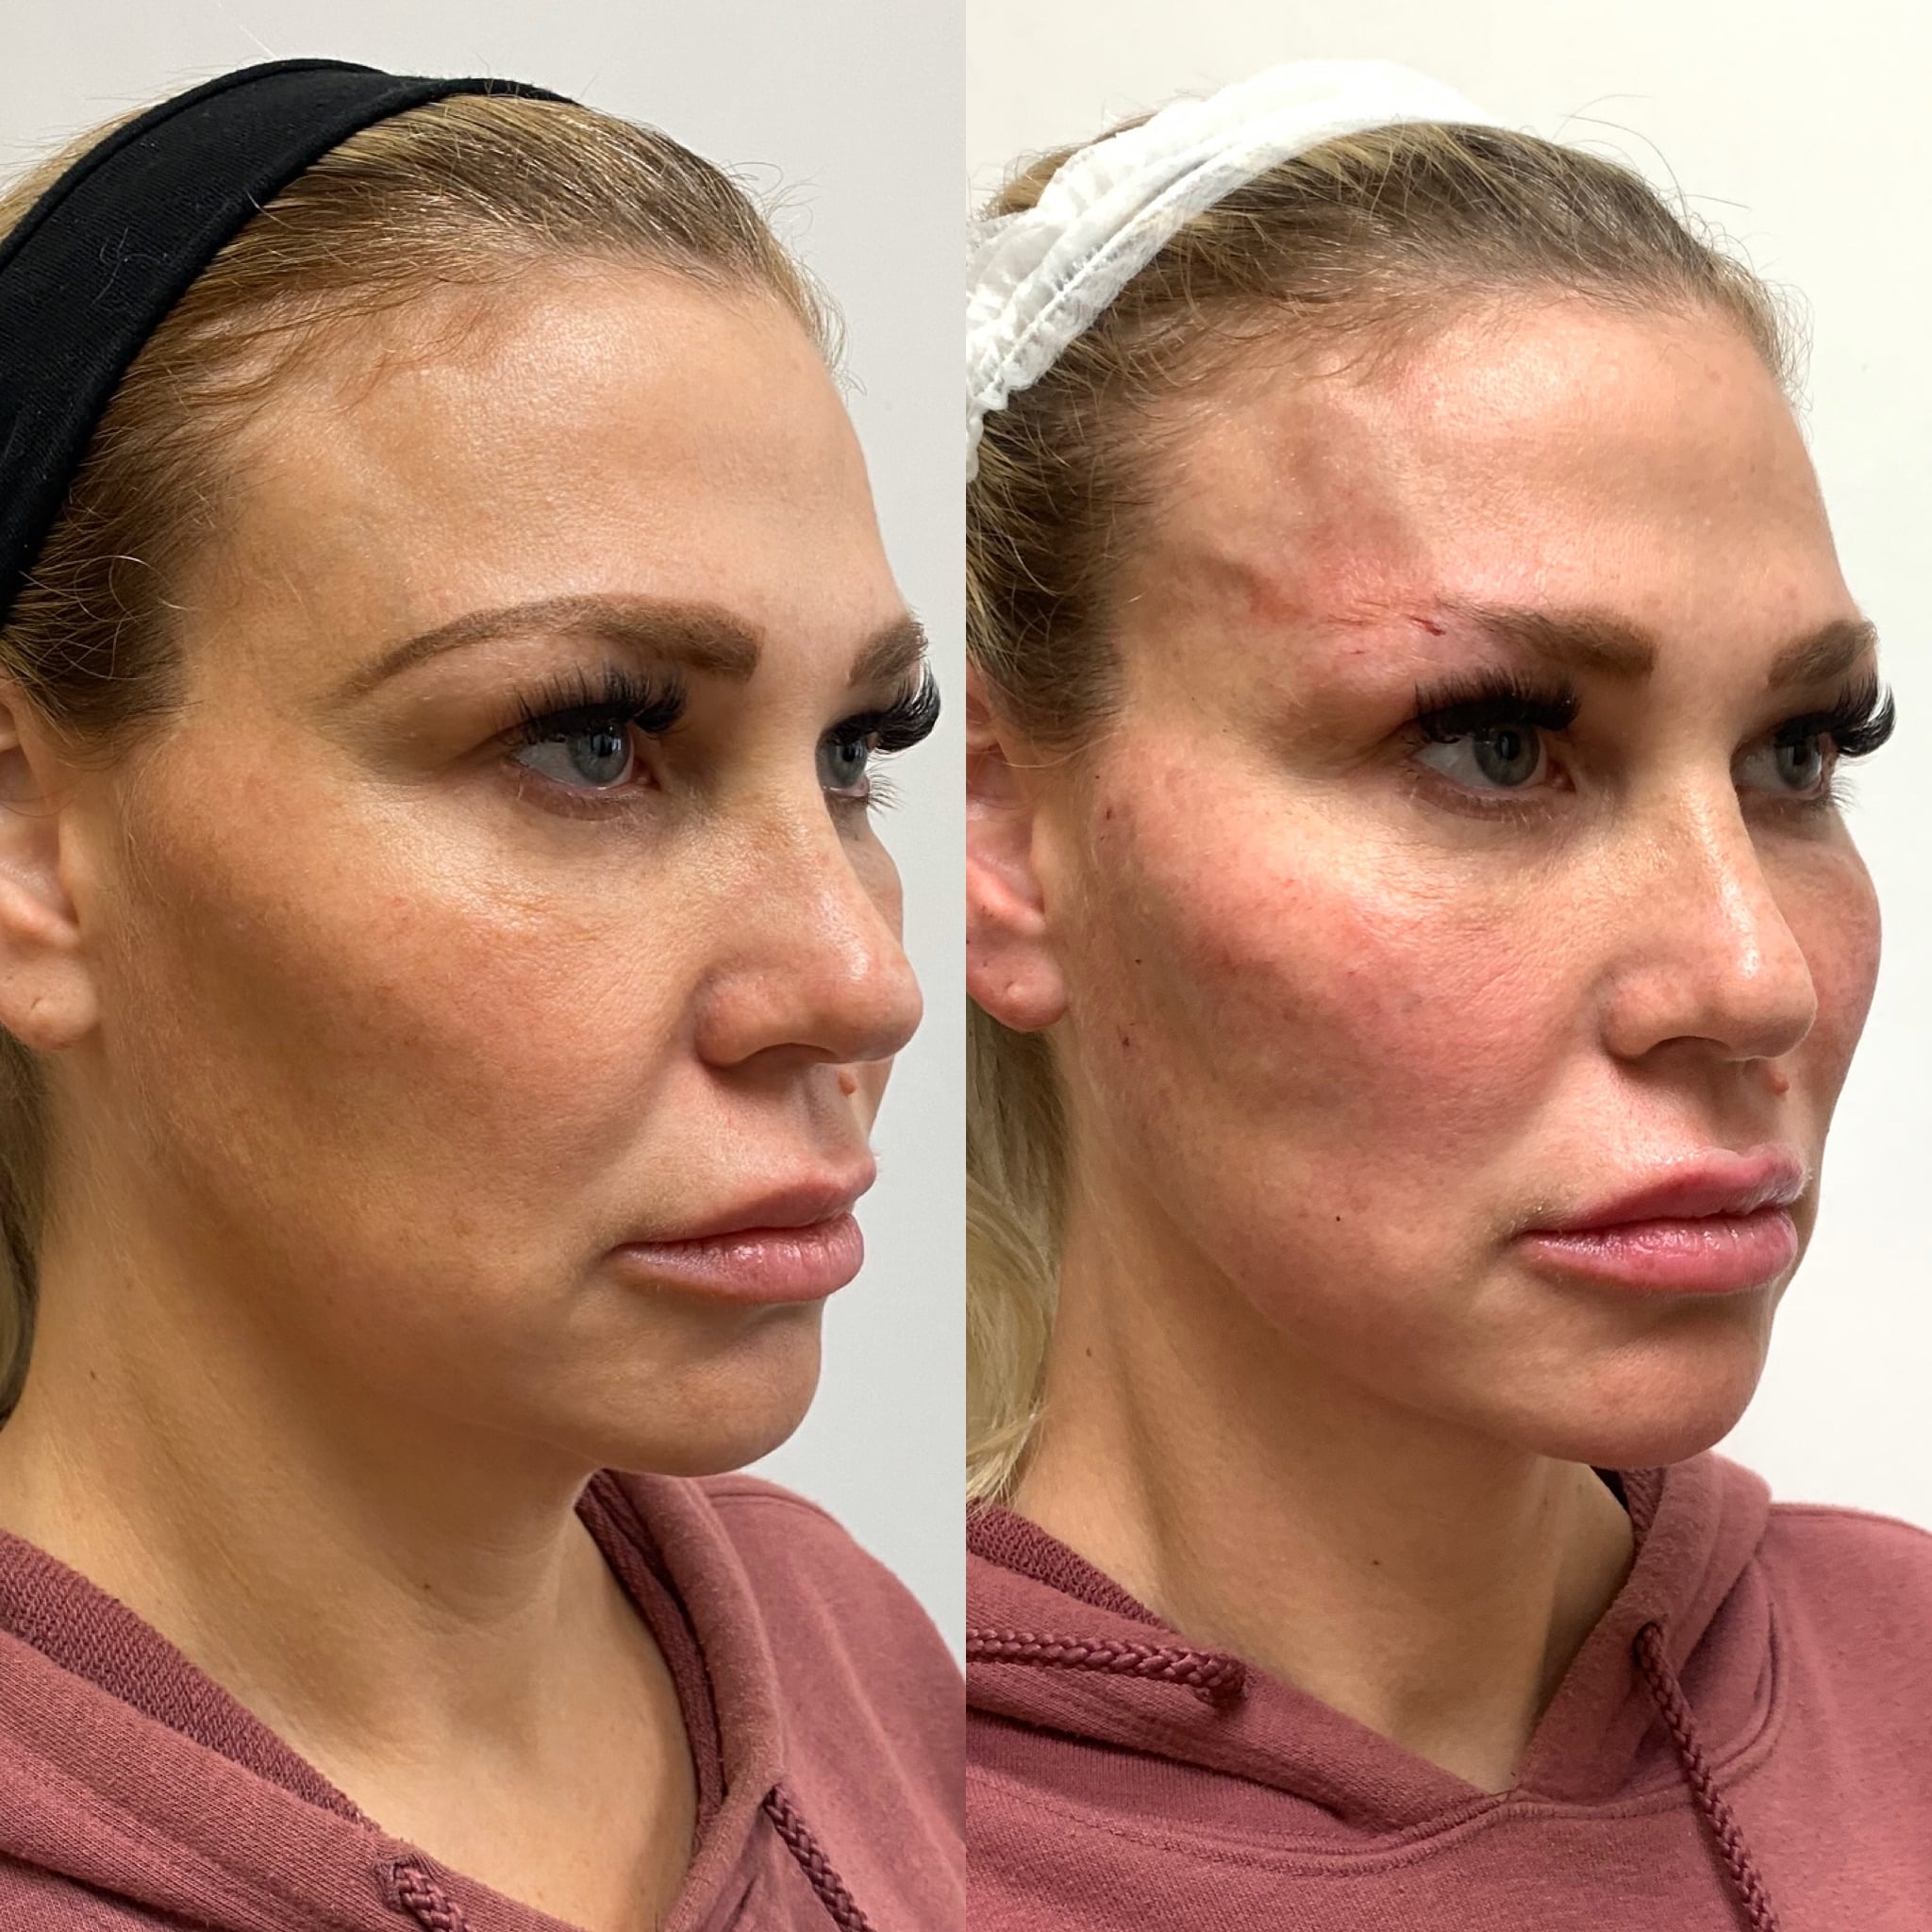 Before and After PDO Threads treatment | Beauty Boost Med Spa at Newport Beach, CA